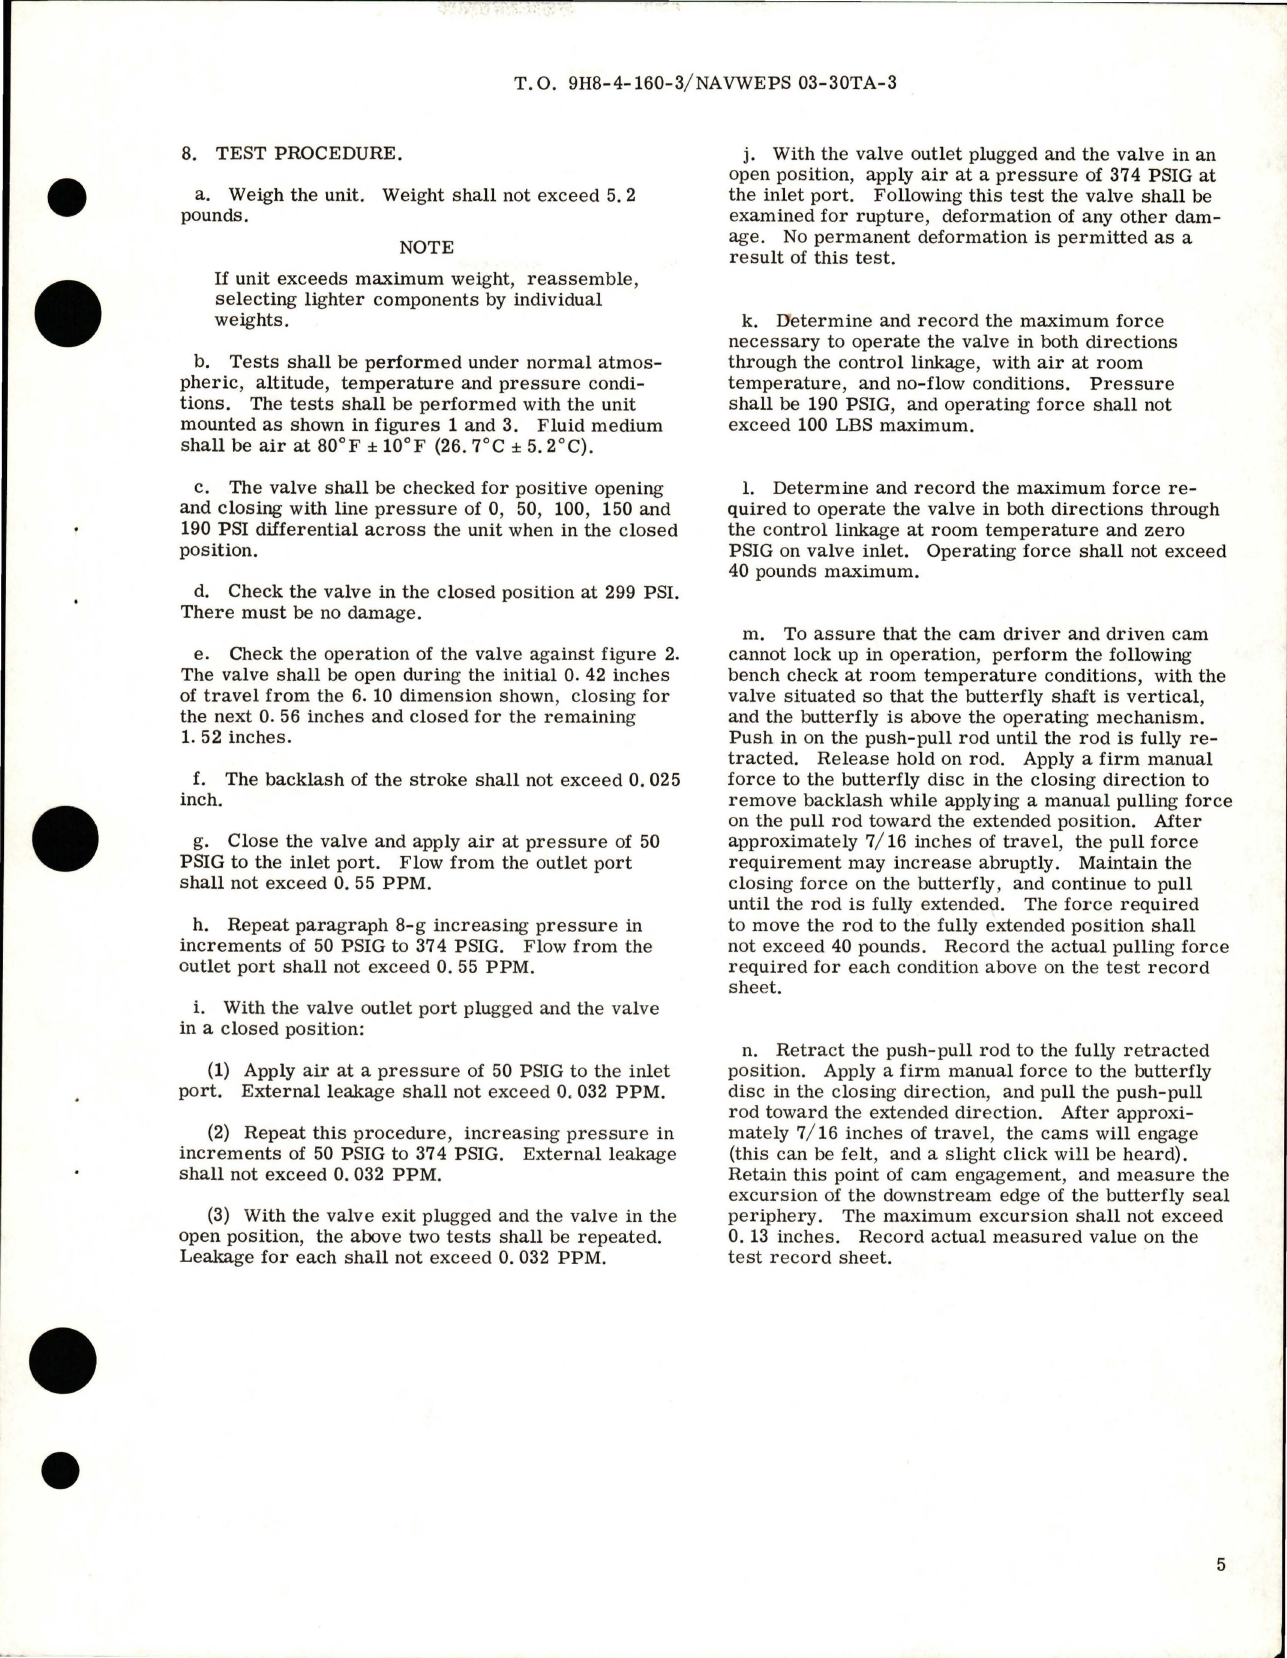 Sample page 7 from AirCorps Library document: Overhaul with Parts Breakdown for Butterfly Valve